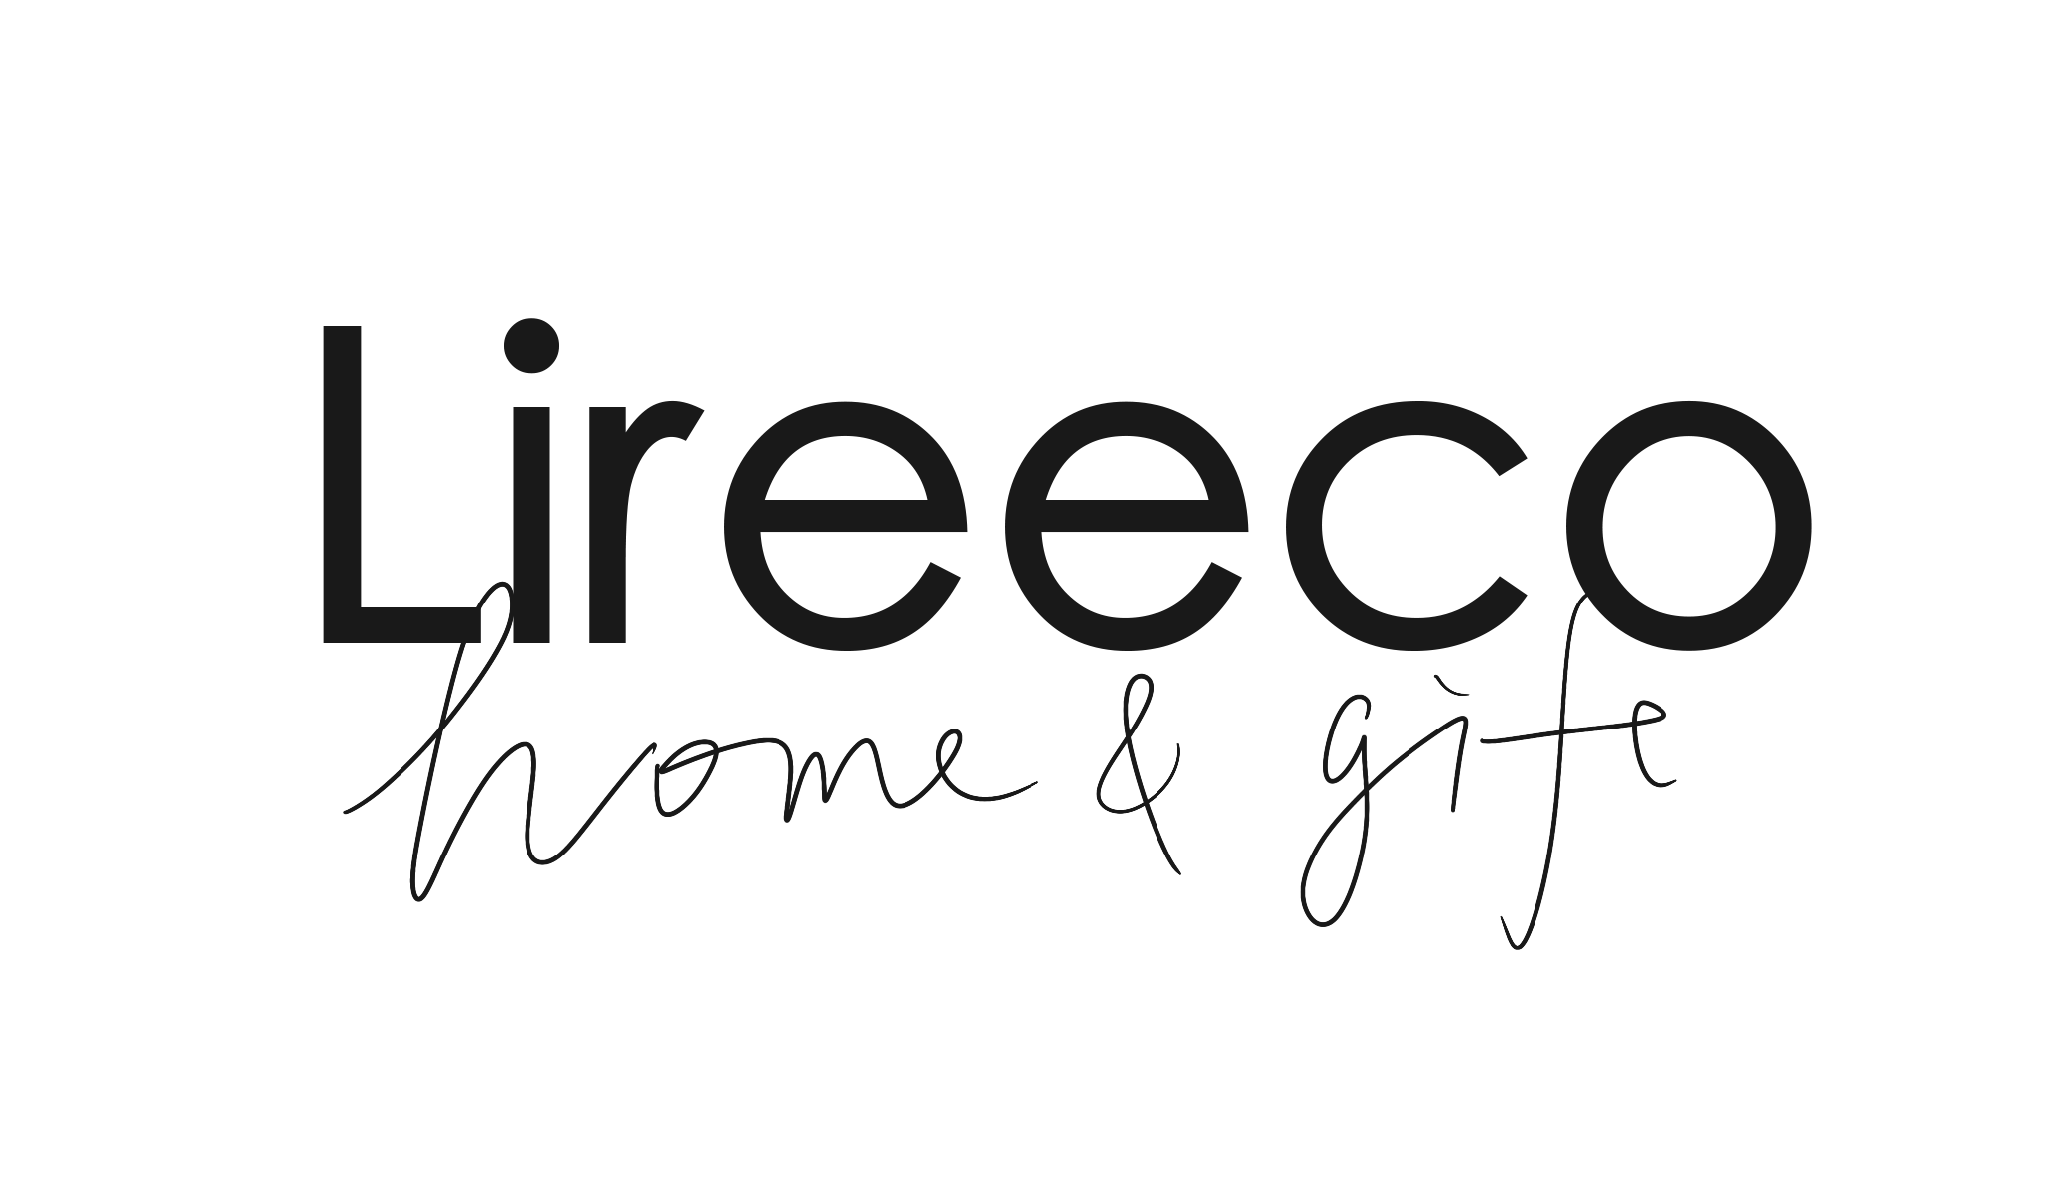 Find Stylish Christmas Decorations and Unique Holiday Gifts at Lireeco’s Christmas Sale Now